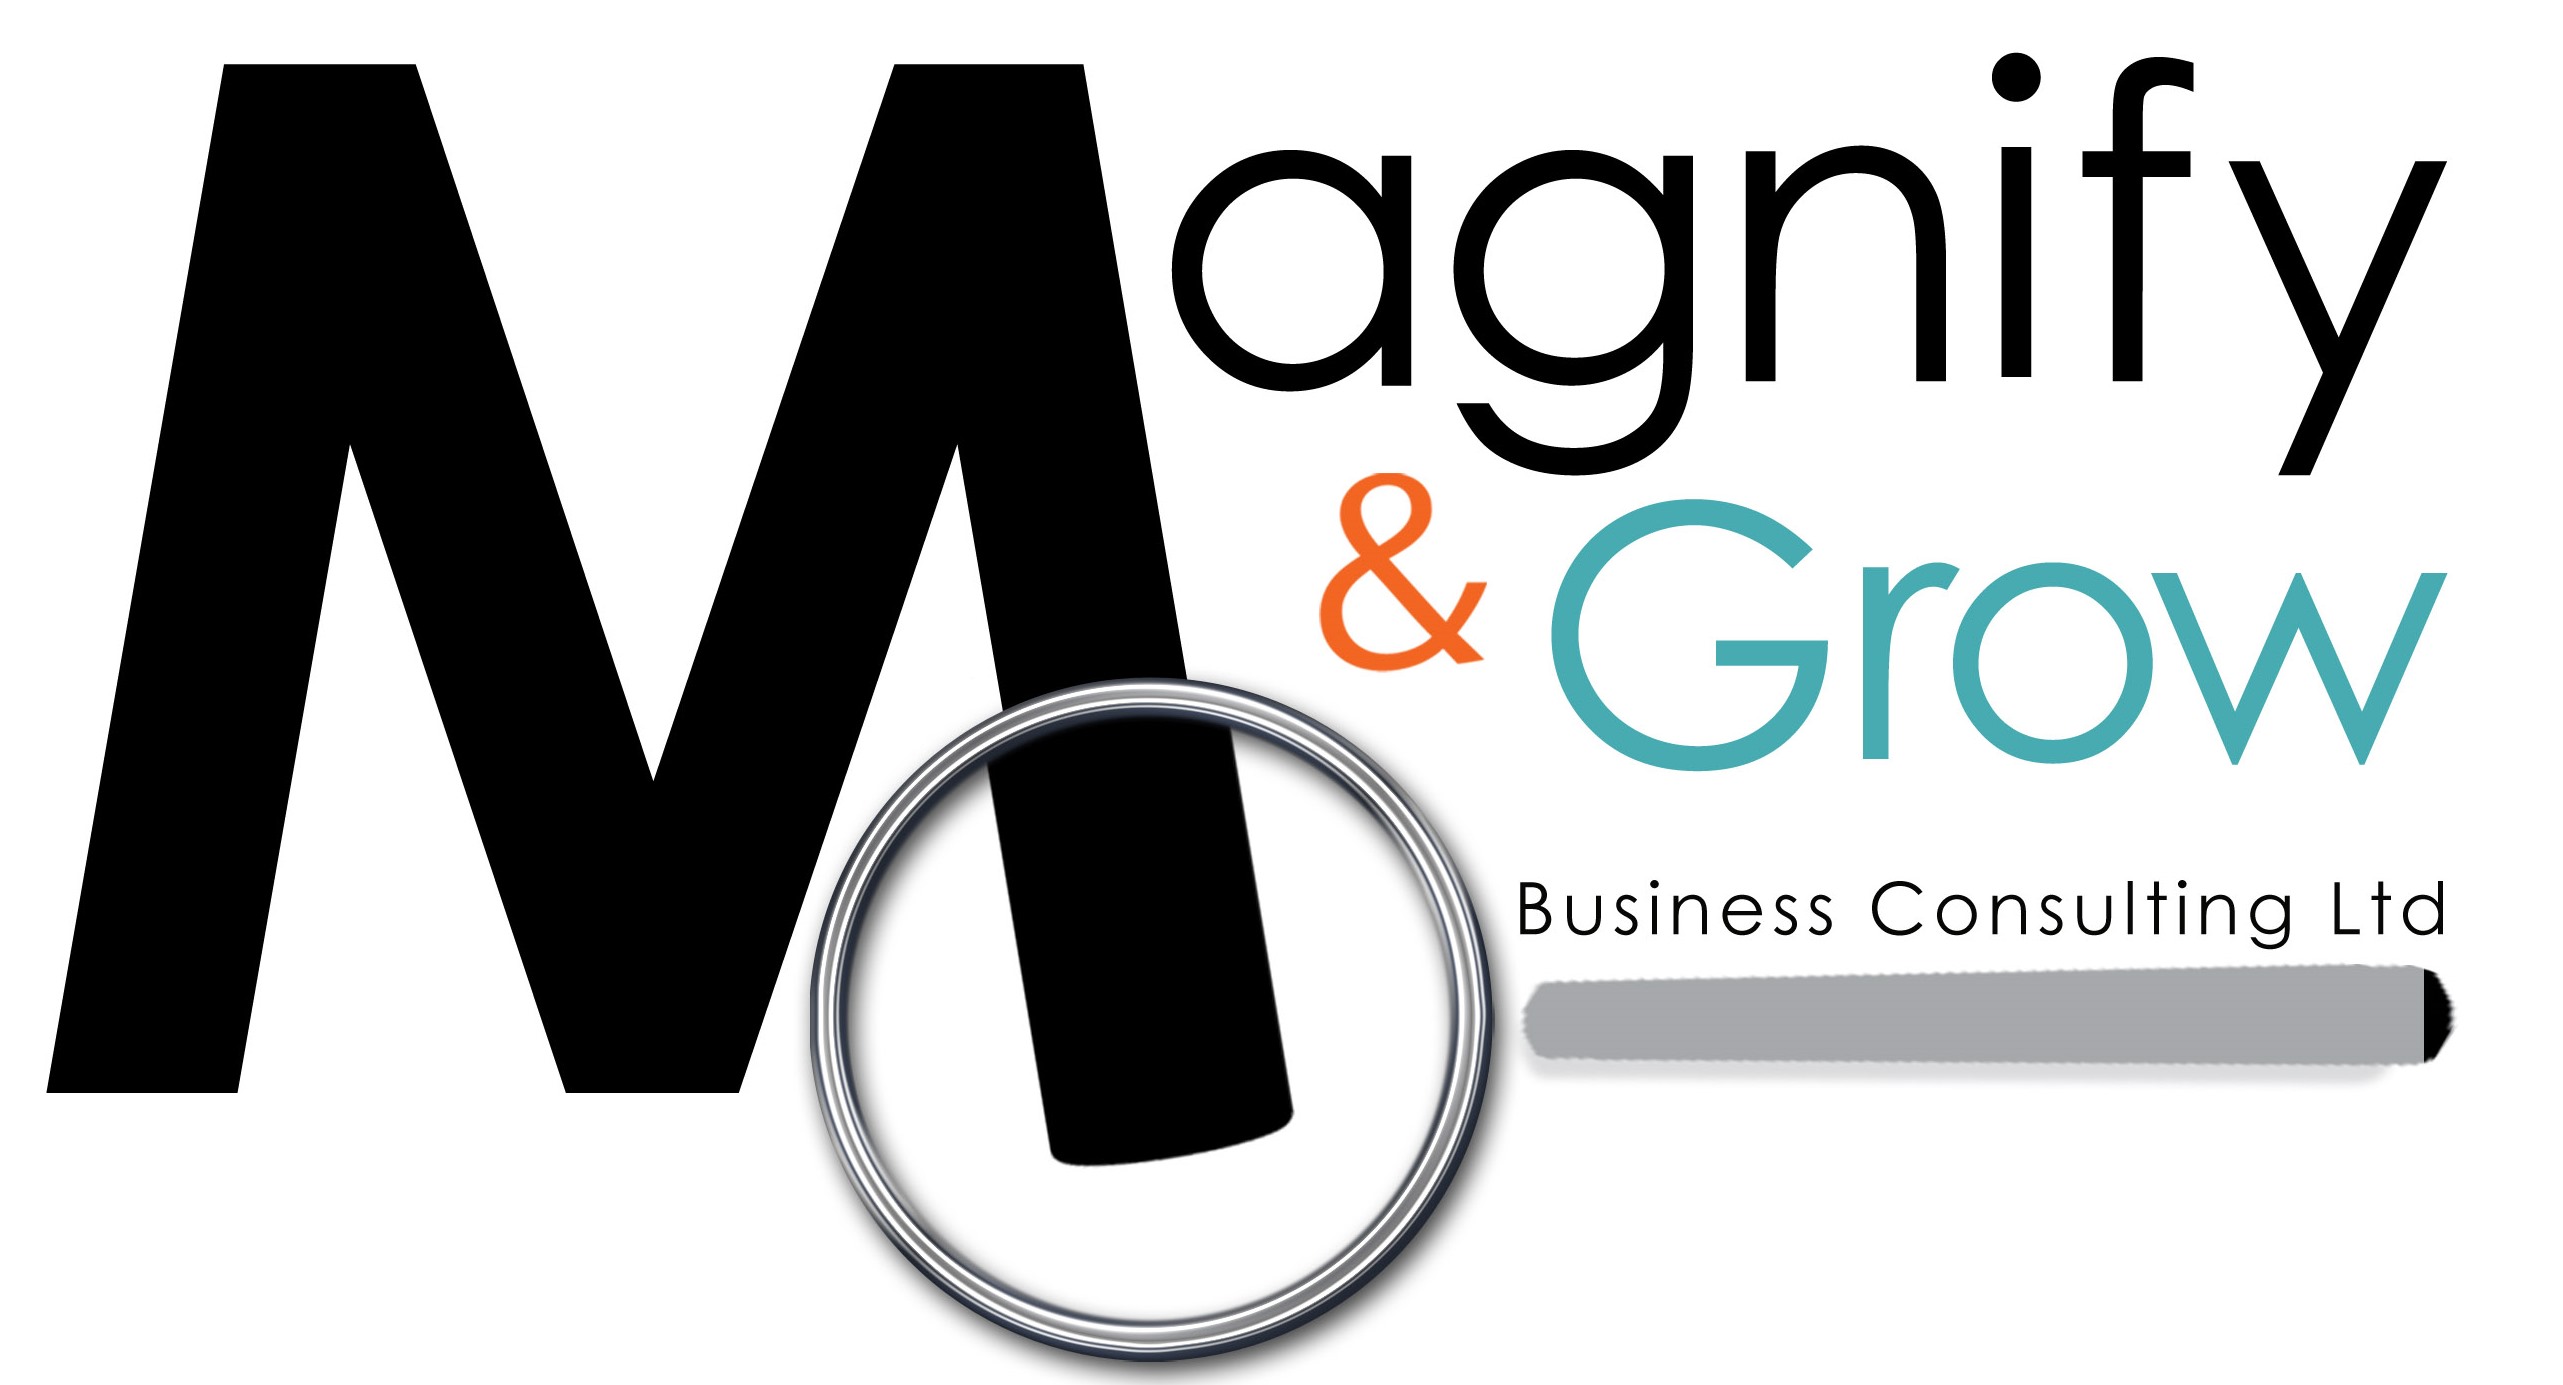 Magnify & Grow Business Consulting Ltd